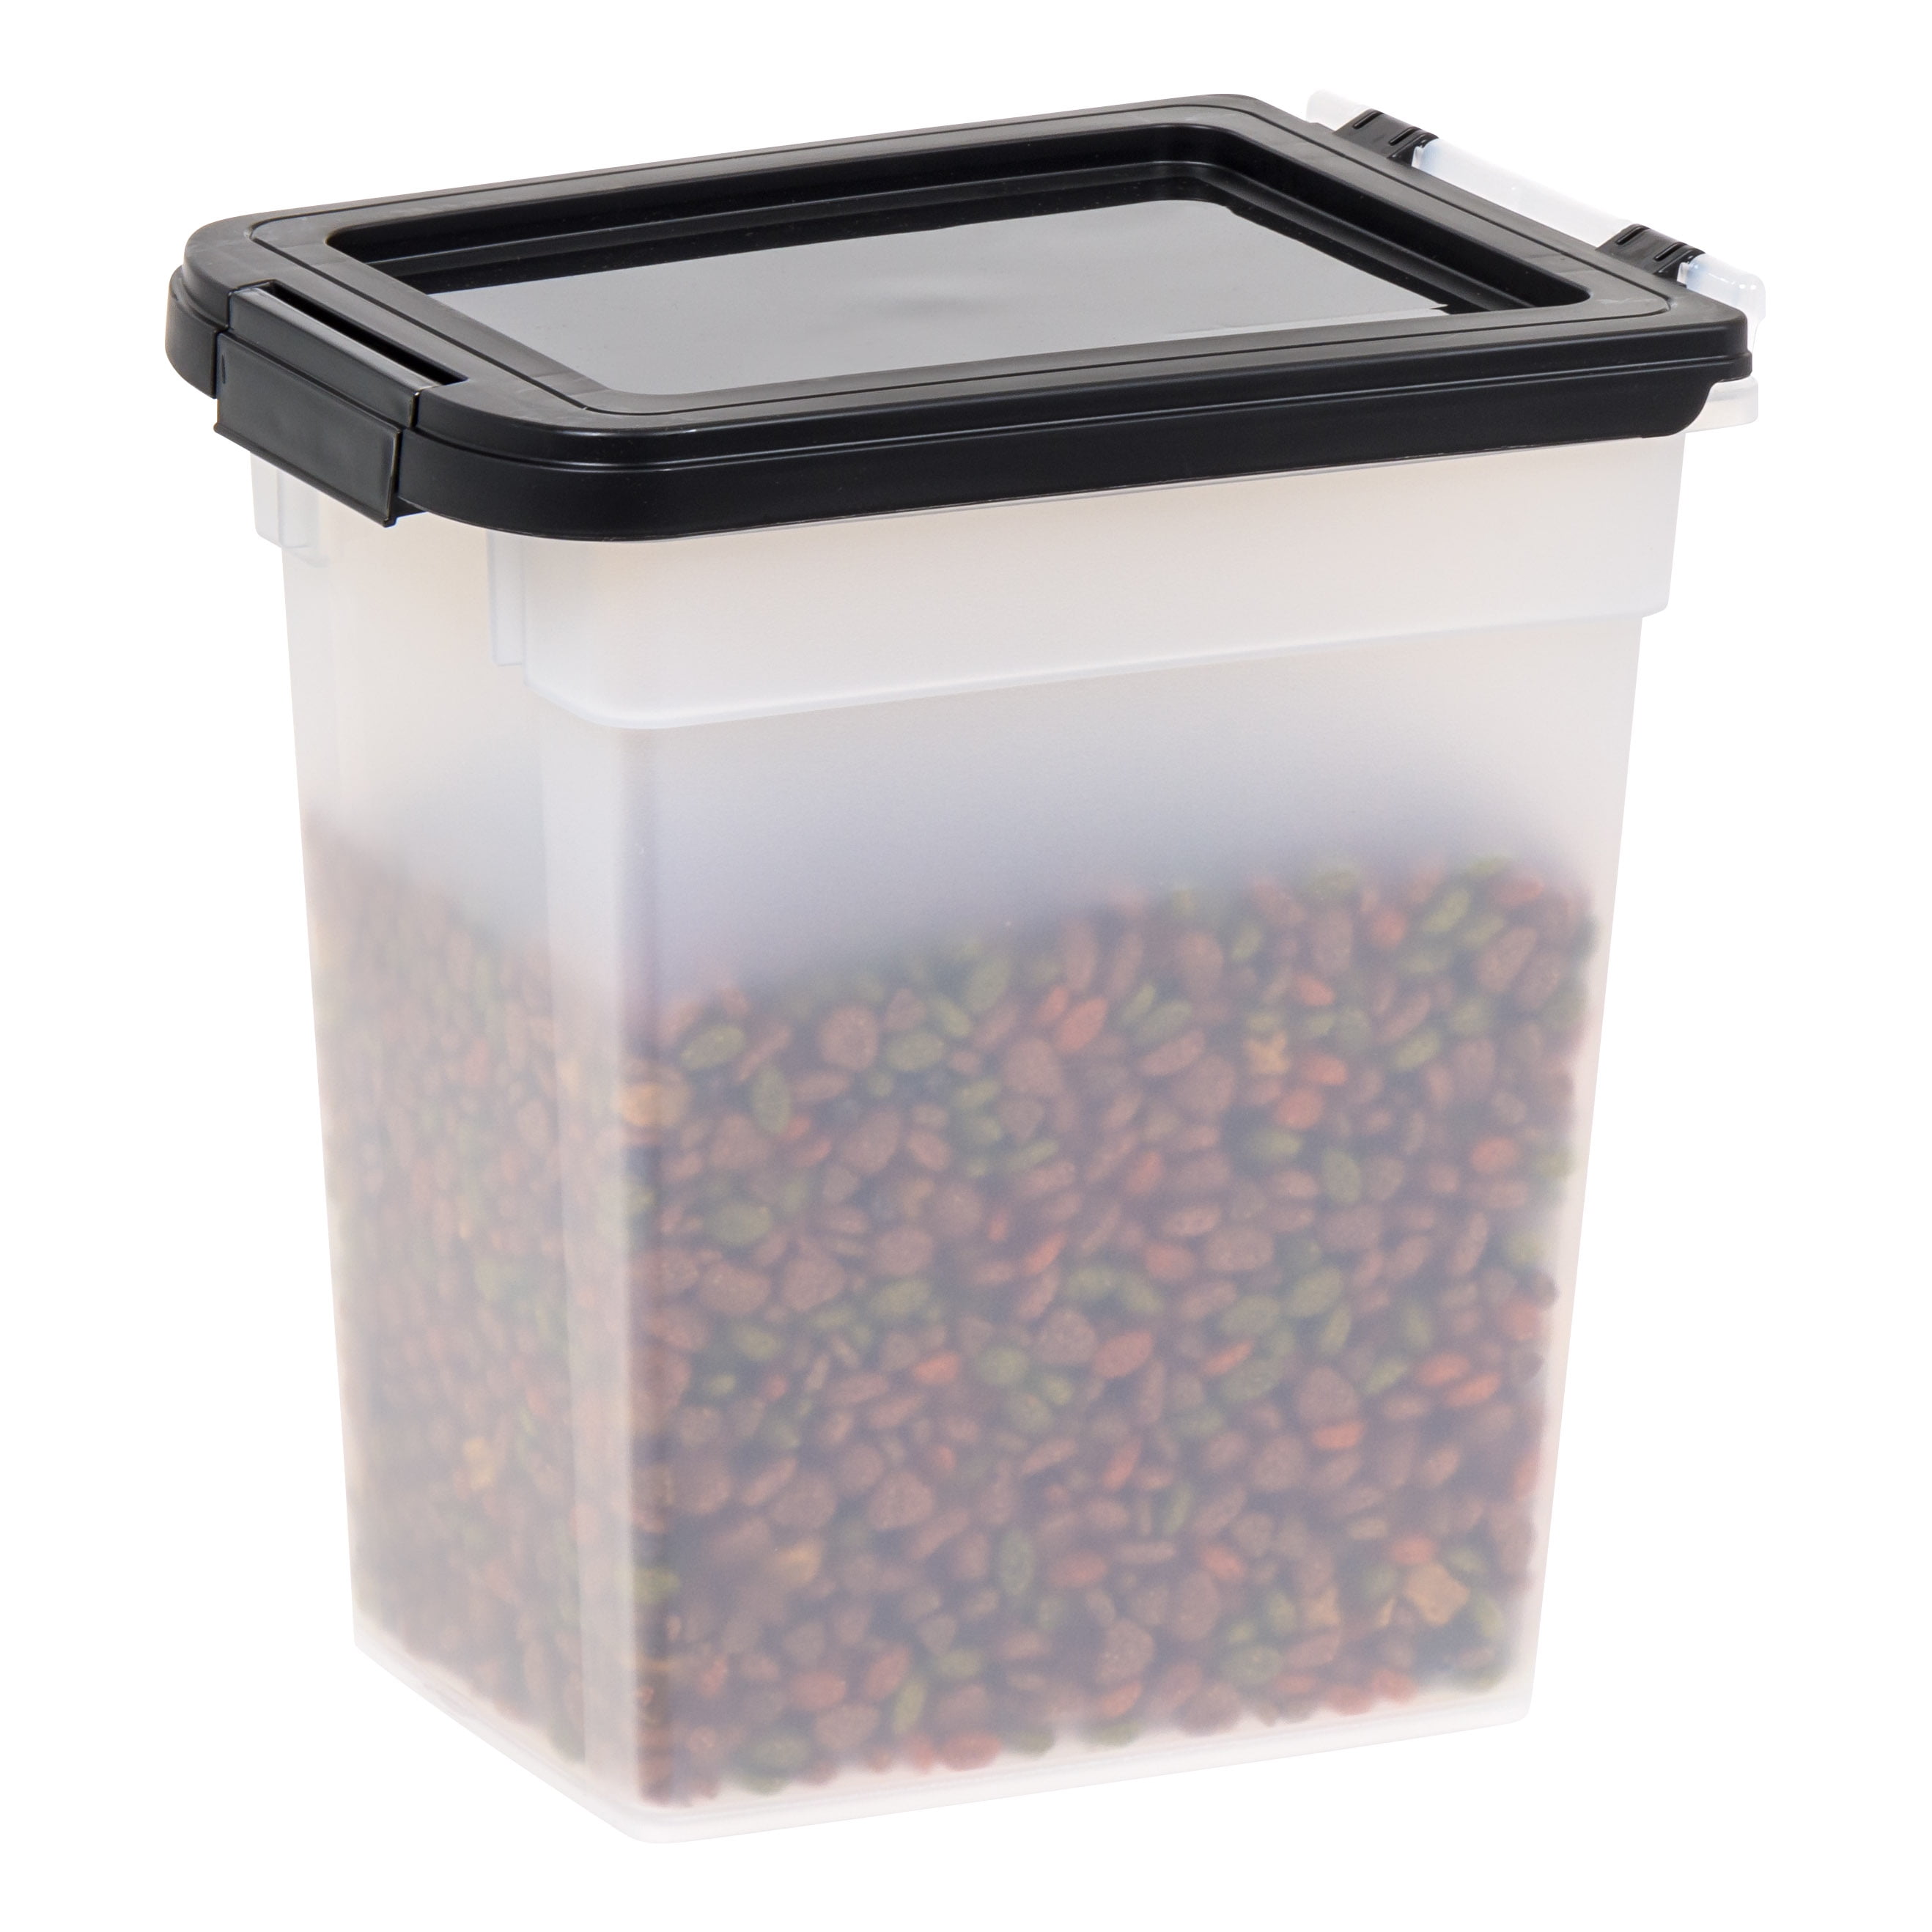  Airtight Food Storage Containers 1Pc, Kitchen Airtight Jars  with Lid Moisture-Proof Storage Box, 5 Size to Available,Stackable Food  Containers Kitchen Cabinets Organize Pet Food (460ml, Black)